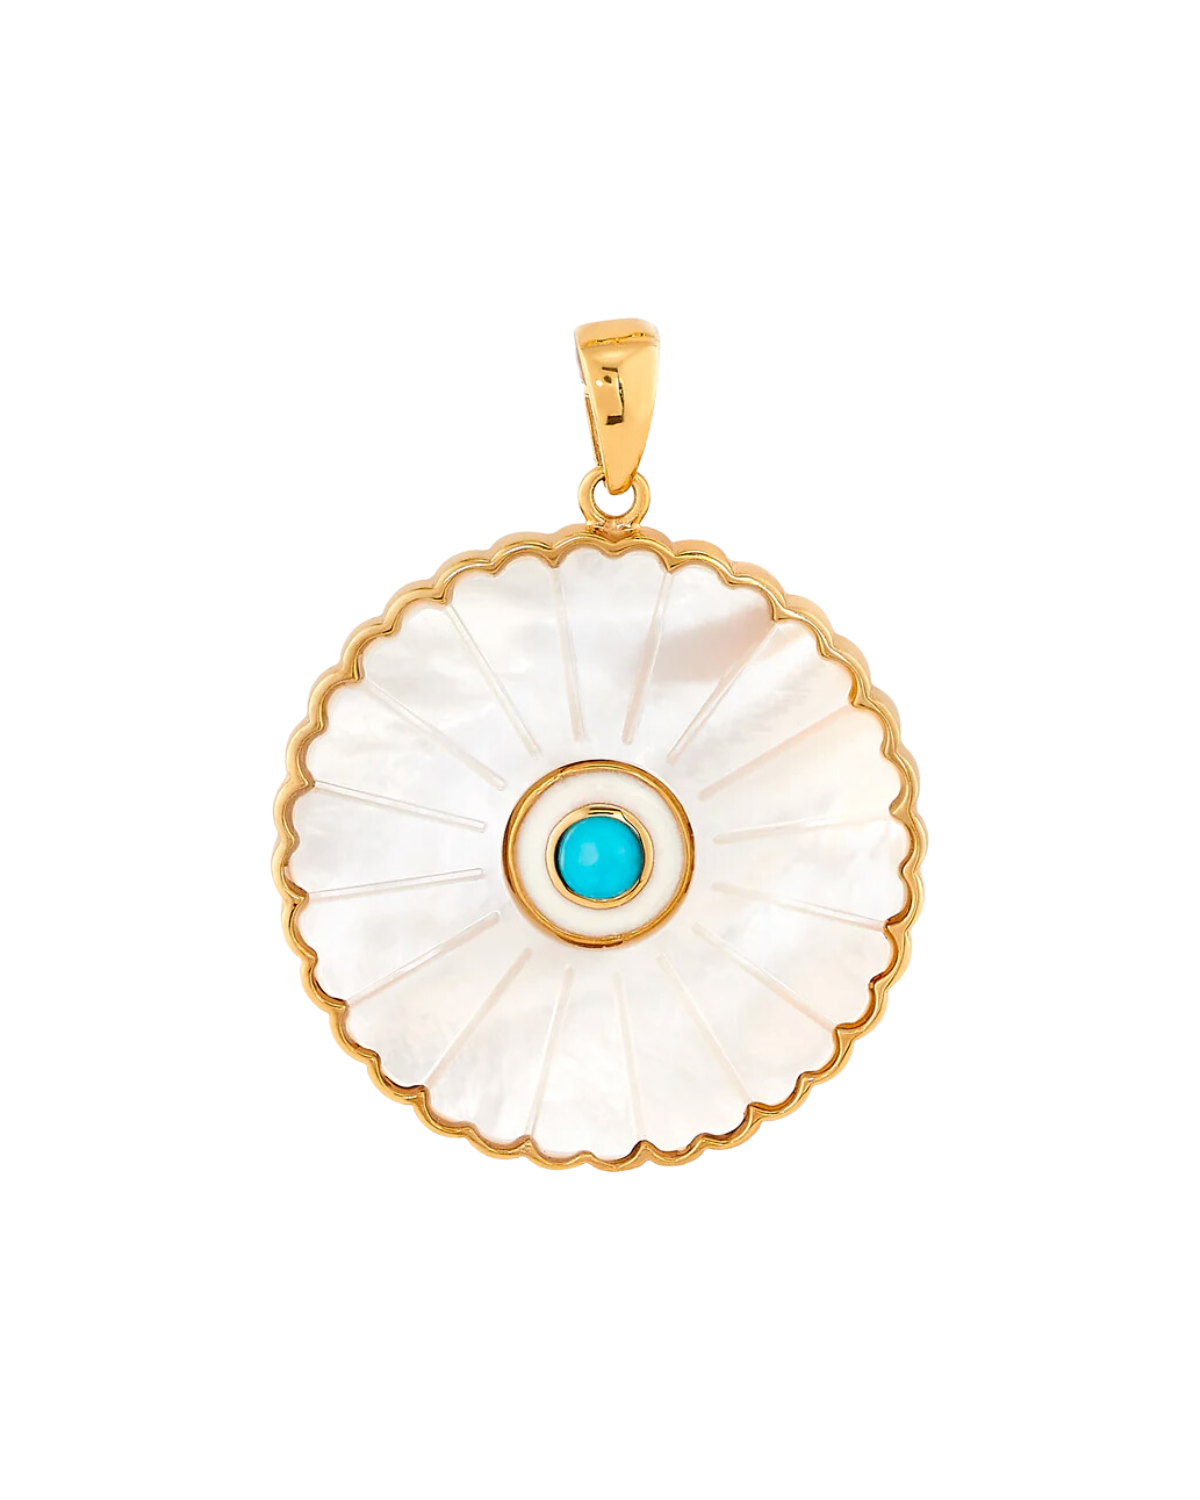 Large Sunflower Pendant (Mother of Pearl + Turquoise)